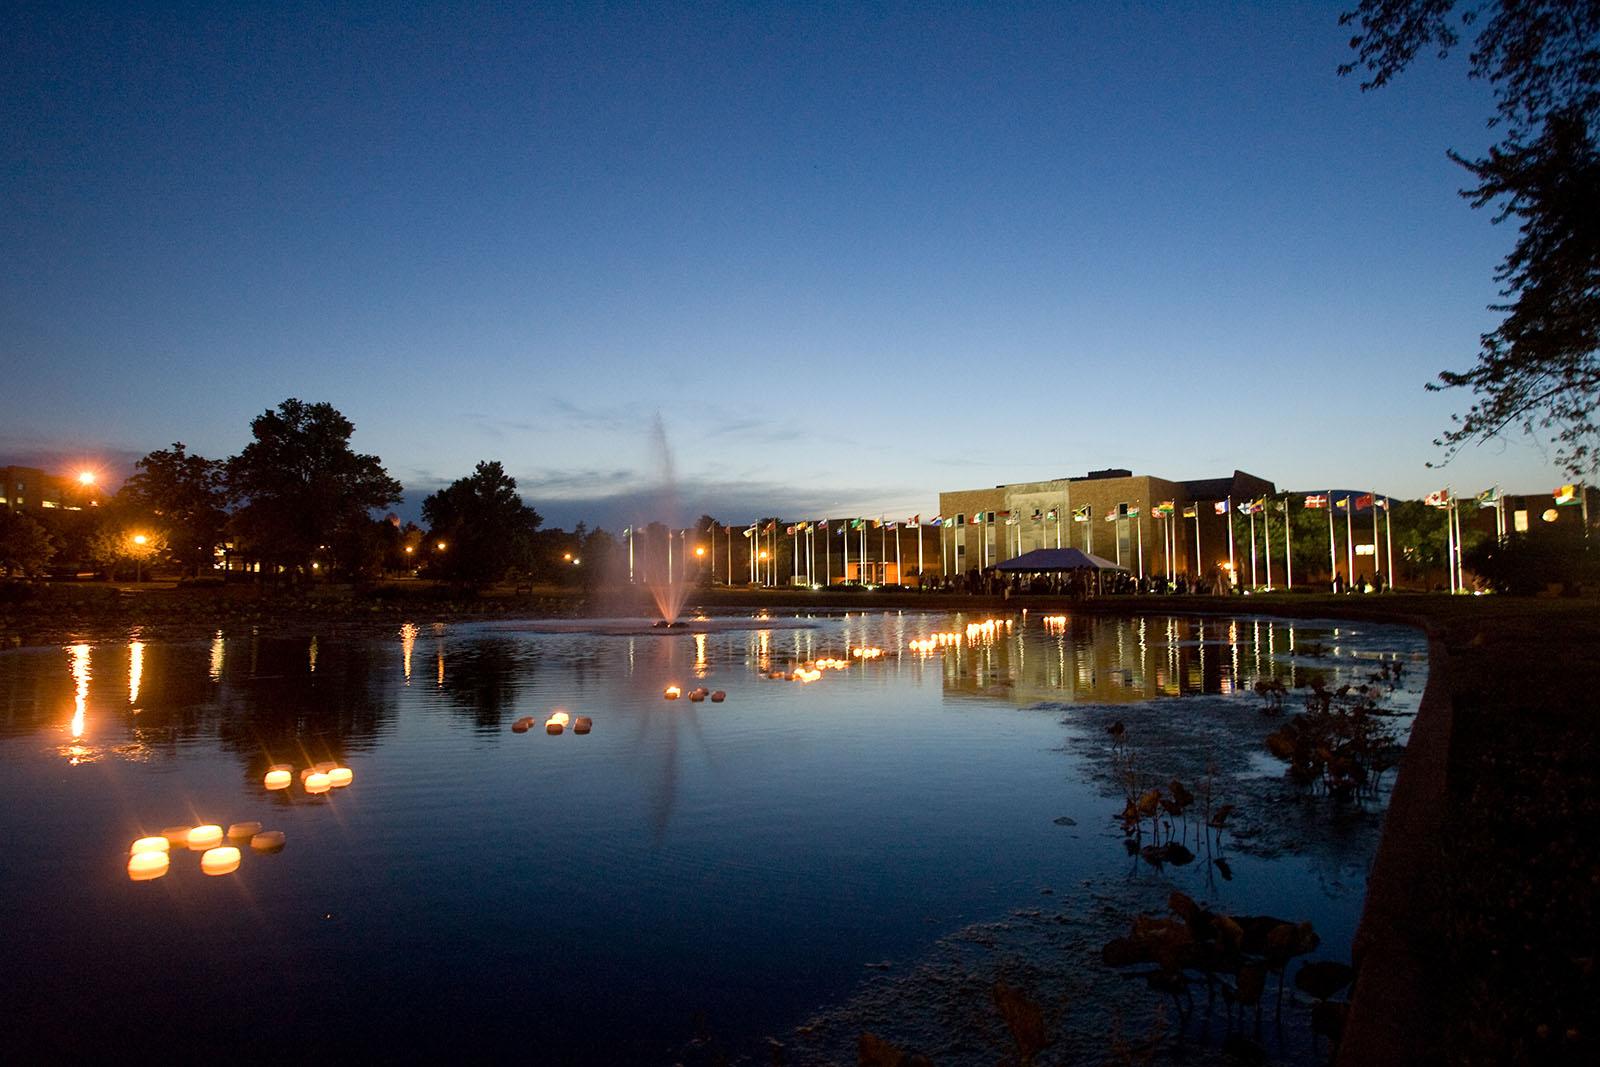 The International Plaza, seen here at night from across Colden Pond, was completed entirely through $400,000 in donations, with the most generous donation from Joyce and Harvey White, a couple with long-standing ties to Northwest.